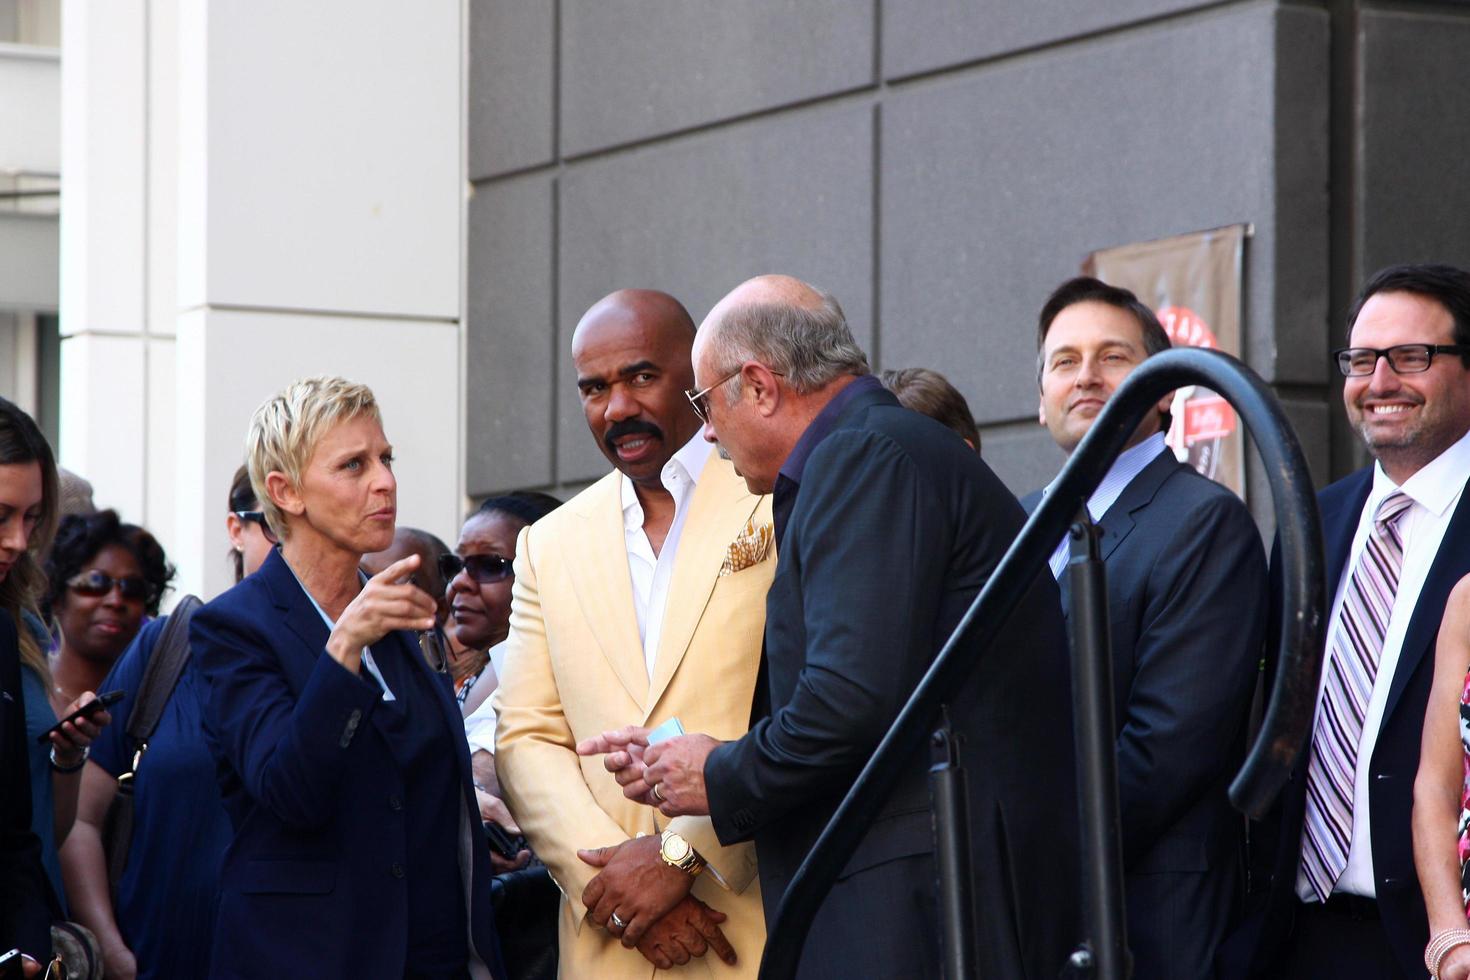 LOS ANGELES, MAY 13 - Ellen DeGeneres, Steve Harvey, Dr. Phil McGraw at the Steve Harvey Hollywood Walk of Fame Star Ceremony at the W Hollywood Hotel on May 13, 2013 in Los Angeles, CA photo